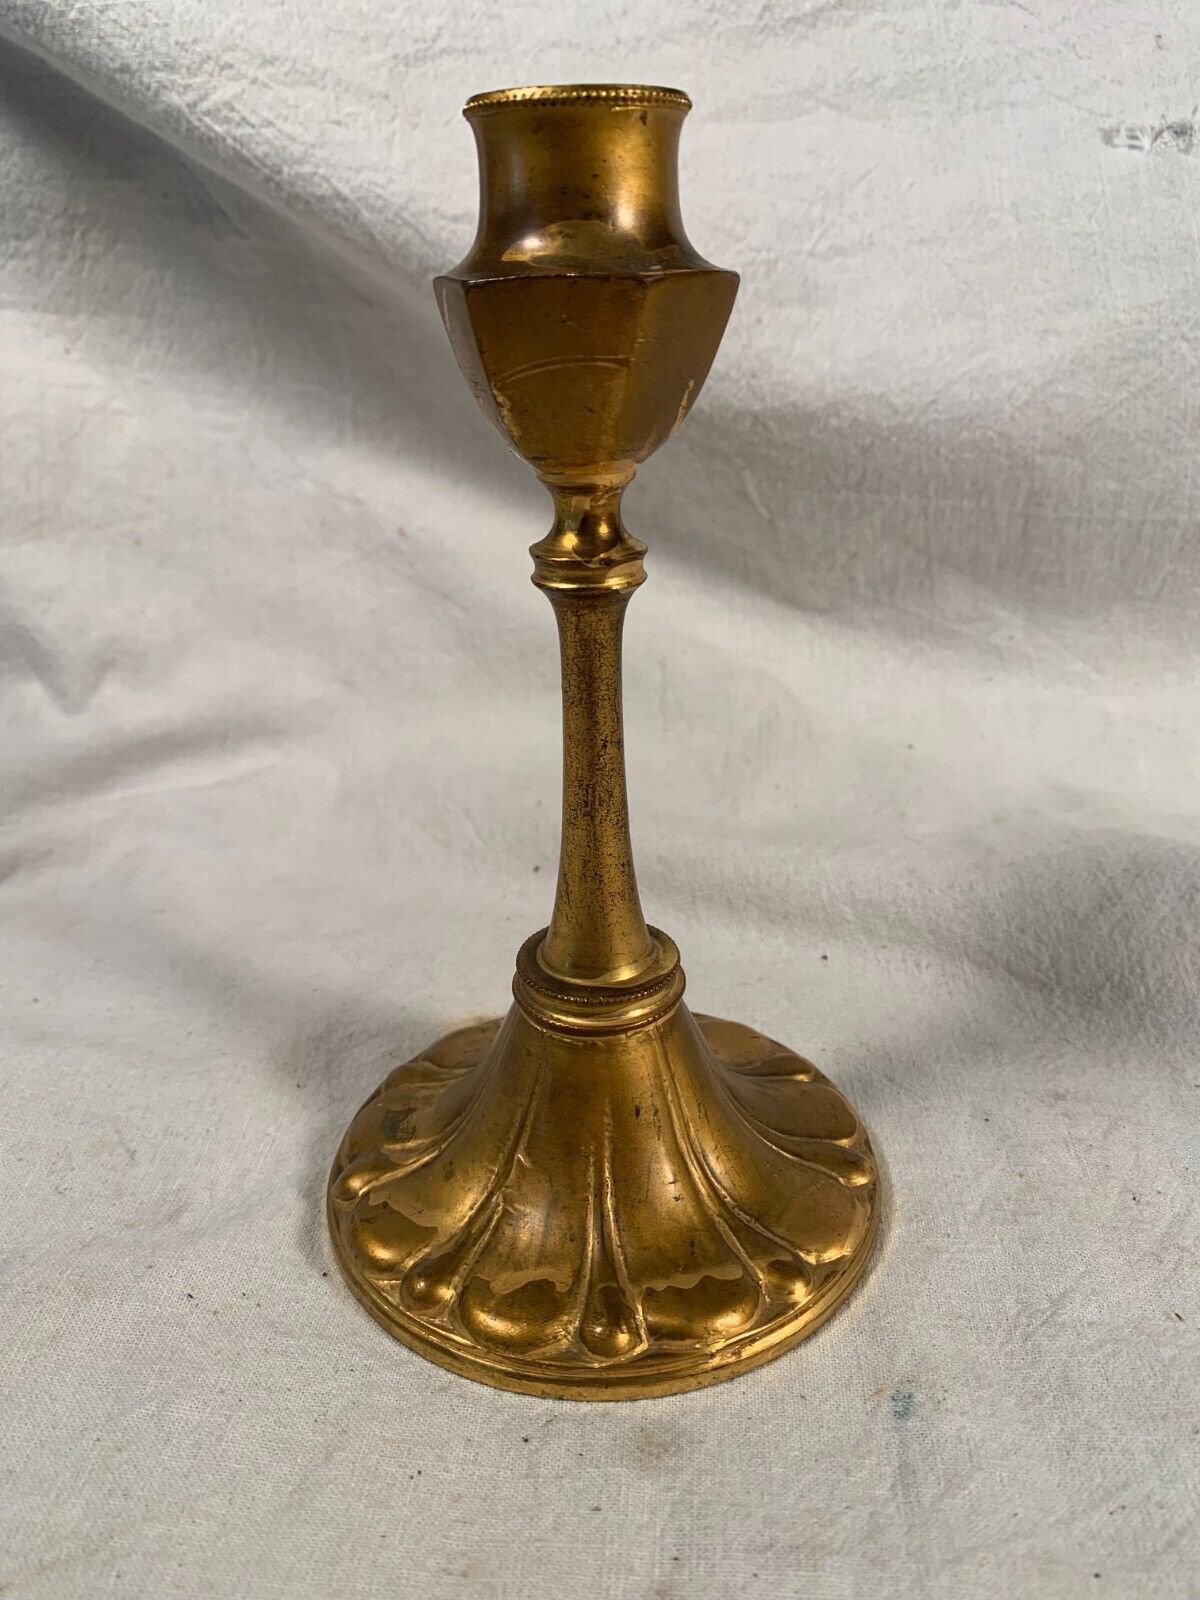 Vintage Gold Leaf Metal J.B. Candlestick Holder circa 1890s 6&3/4 inches tall